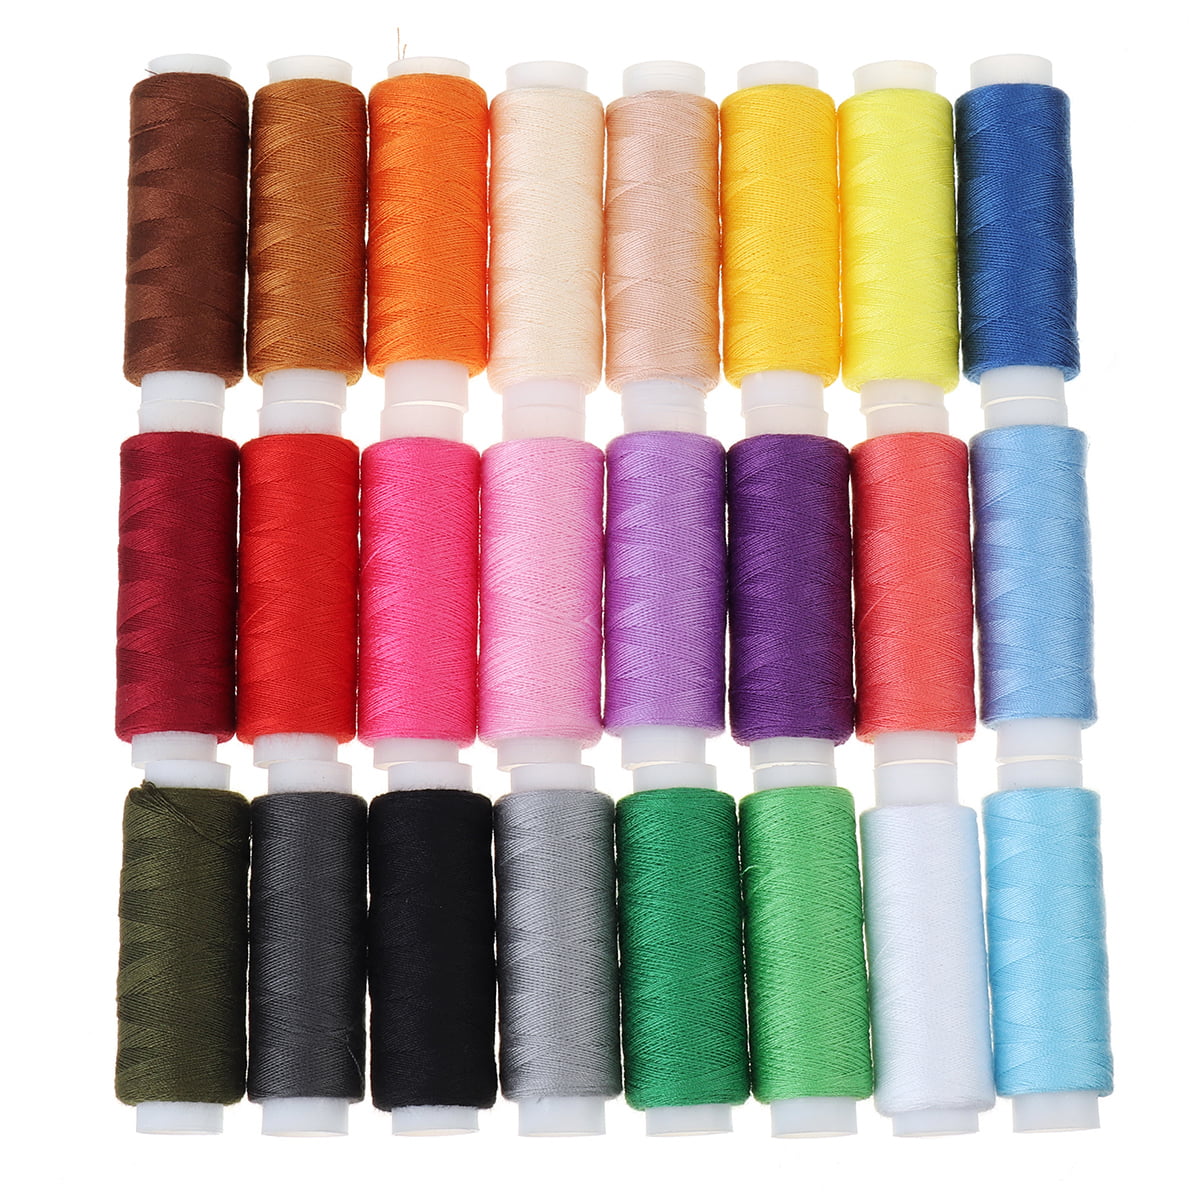 36Pcs Sewing Machine Bobbins Thread Spools Case With Threads for Singer Brother